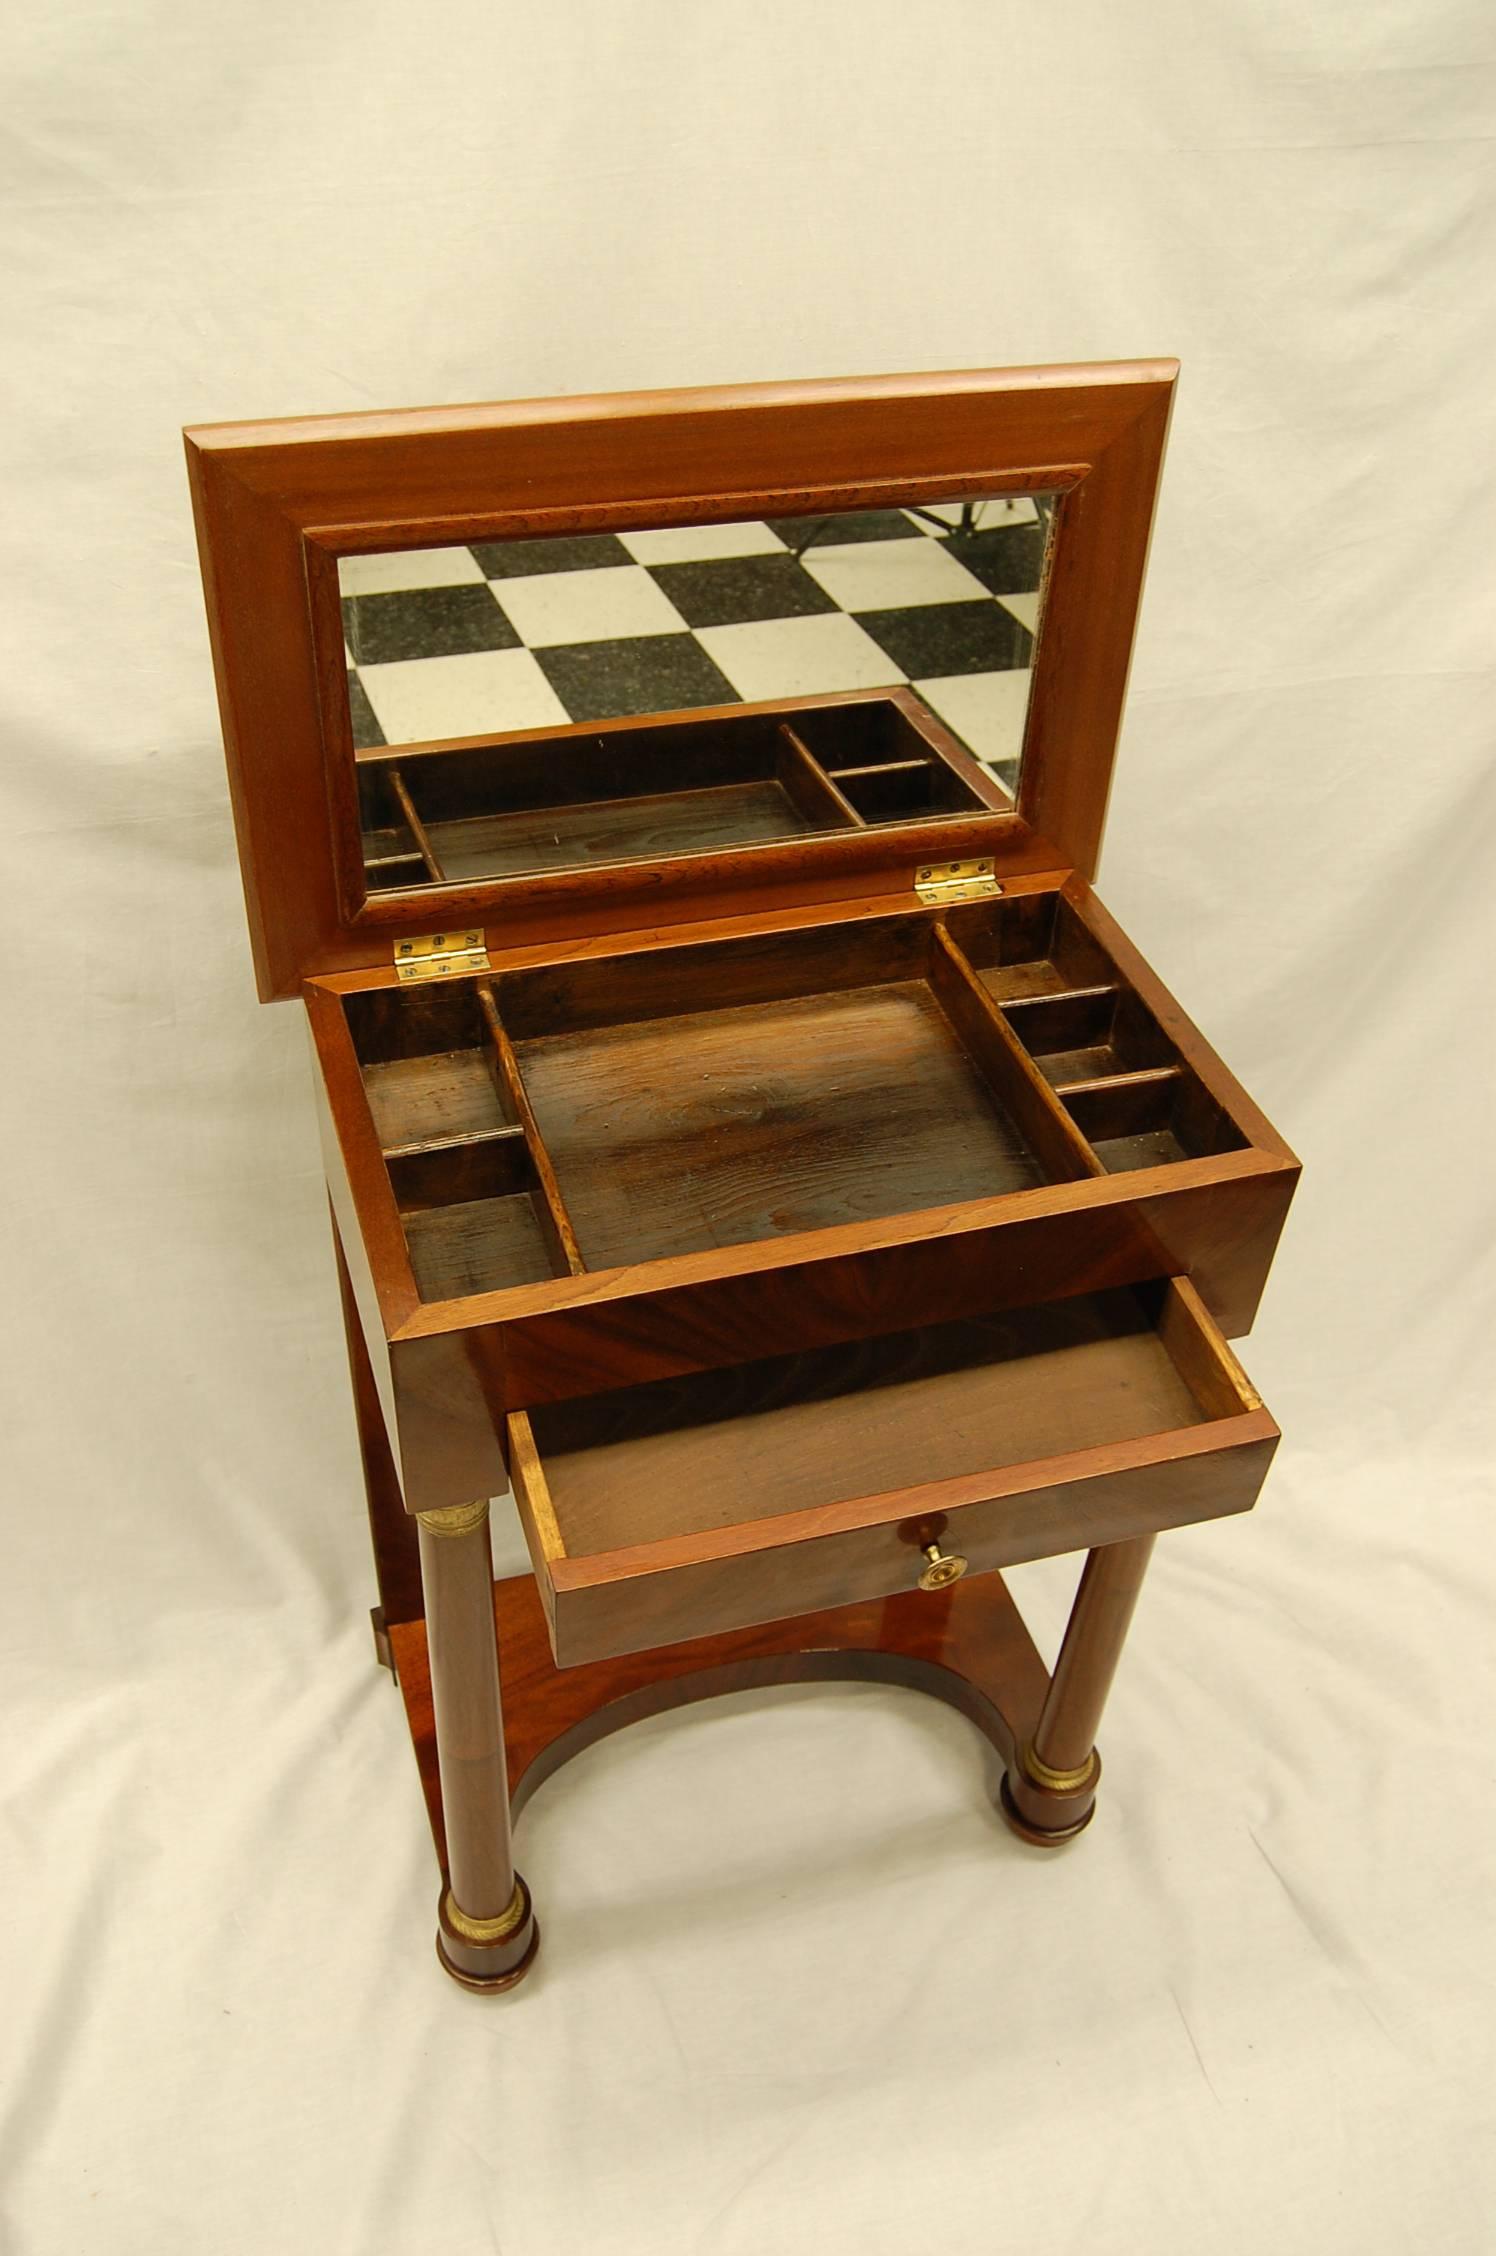 Beautiful wood grain and the shape makes this a particularly useful mahogany sewing table with lift up lid and mirror underneath exposing a divided interior area. Recently cleaned and polished.